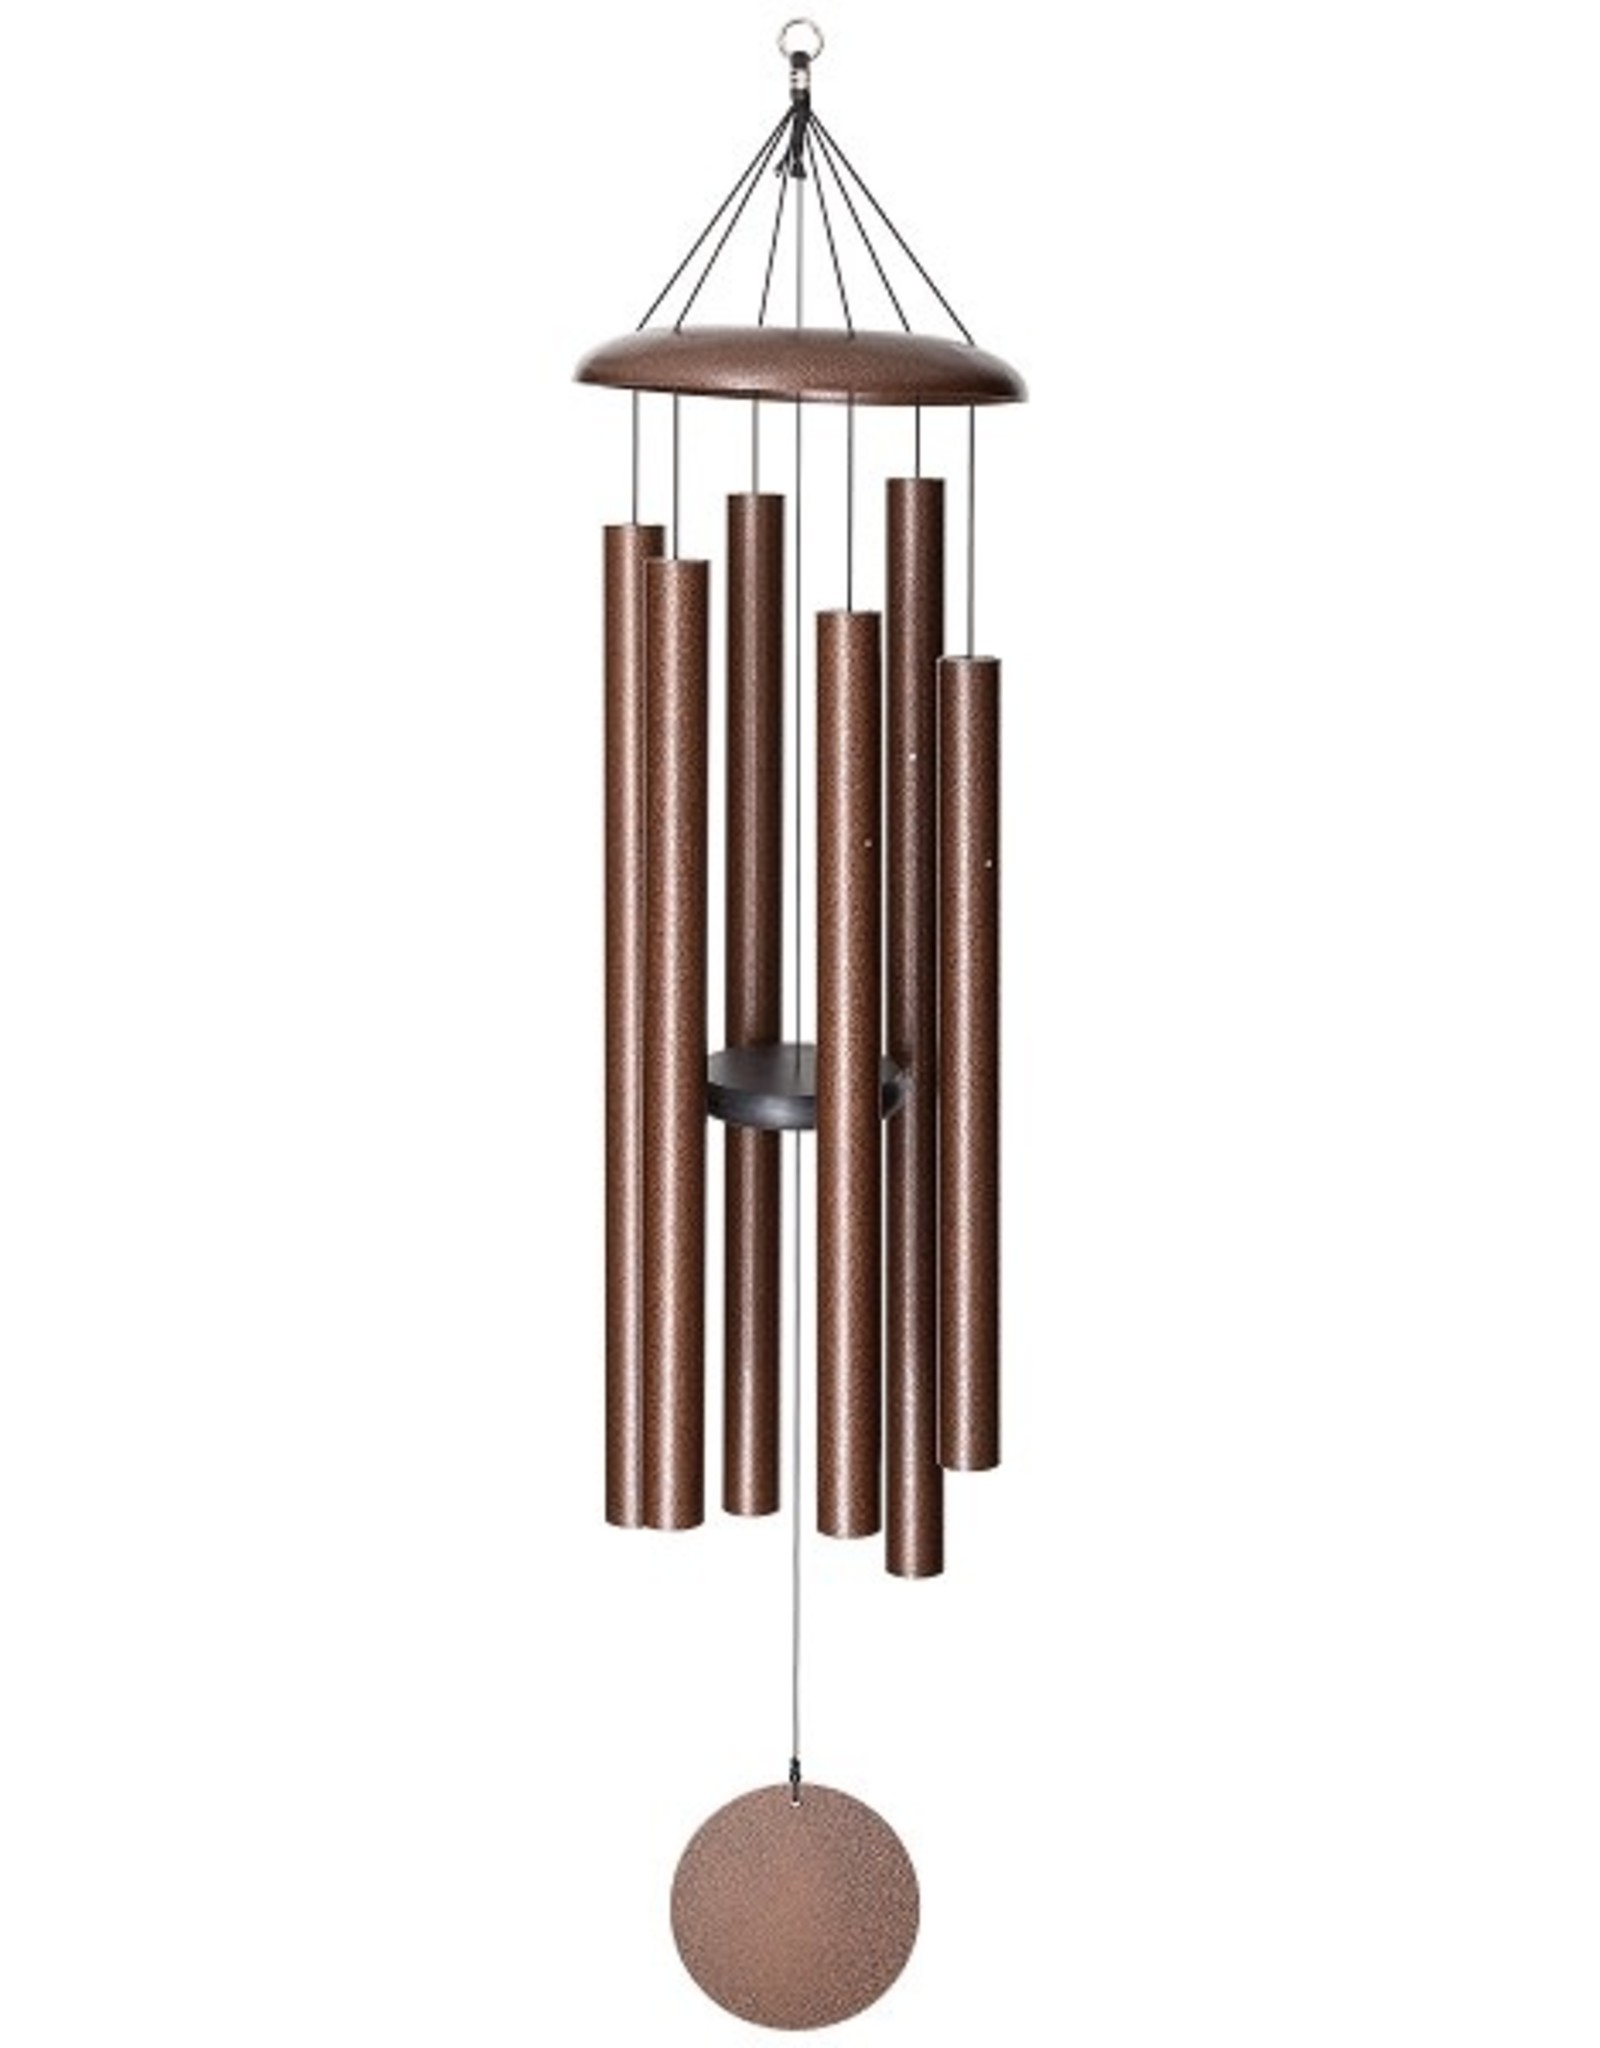 Wind River Chimes CORINTHIAN BELLS 56" CHIME - G scale